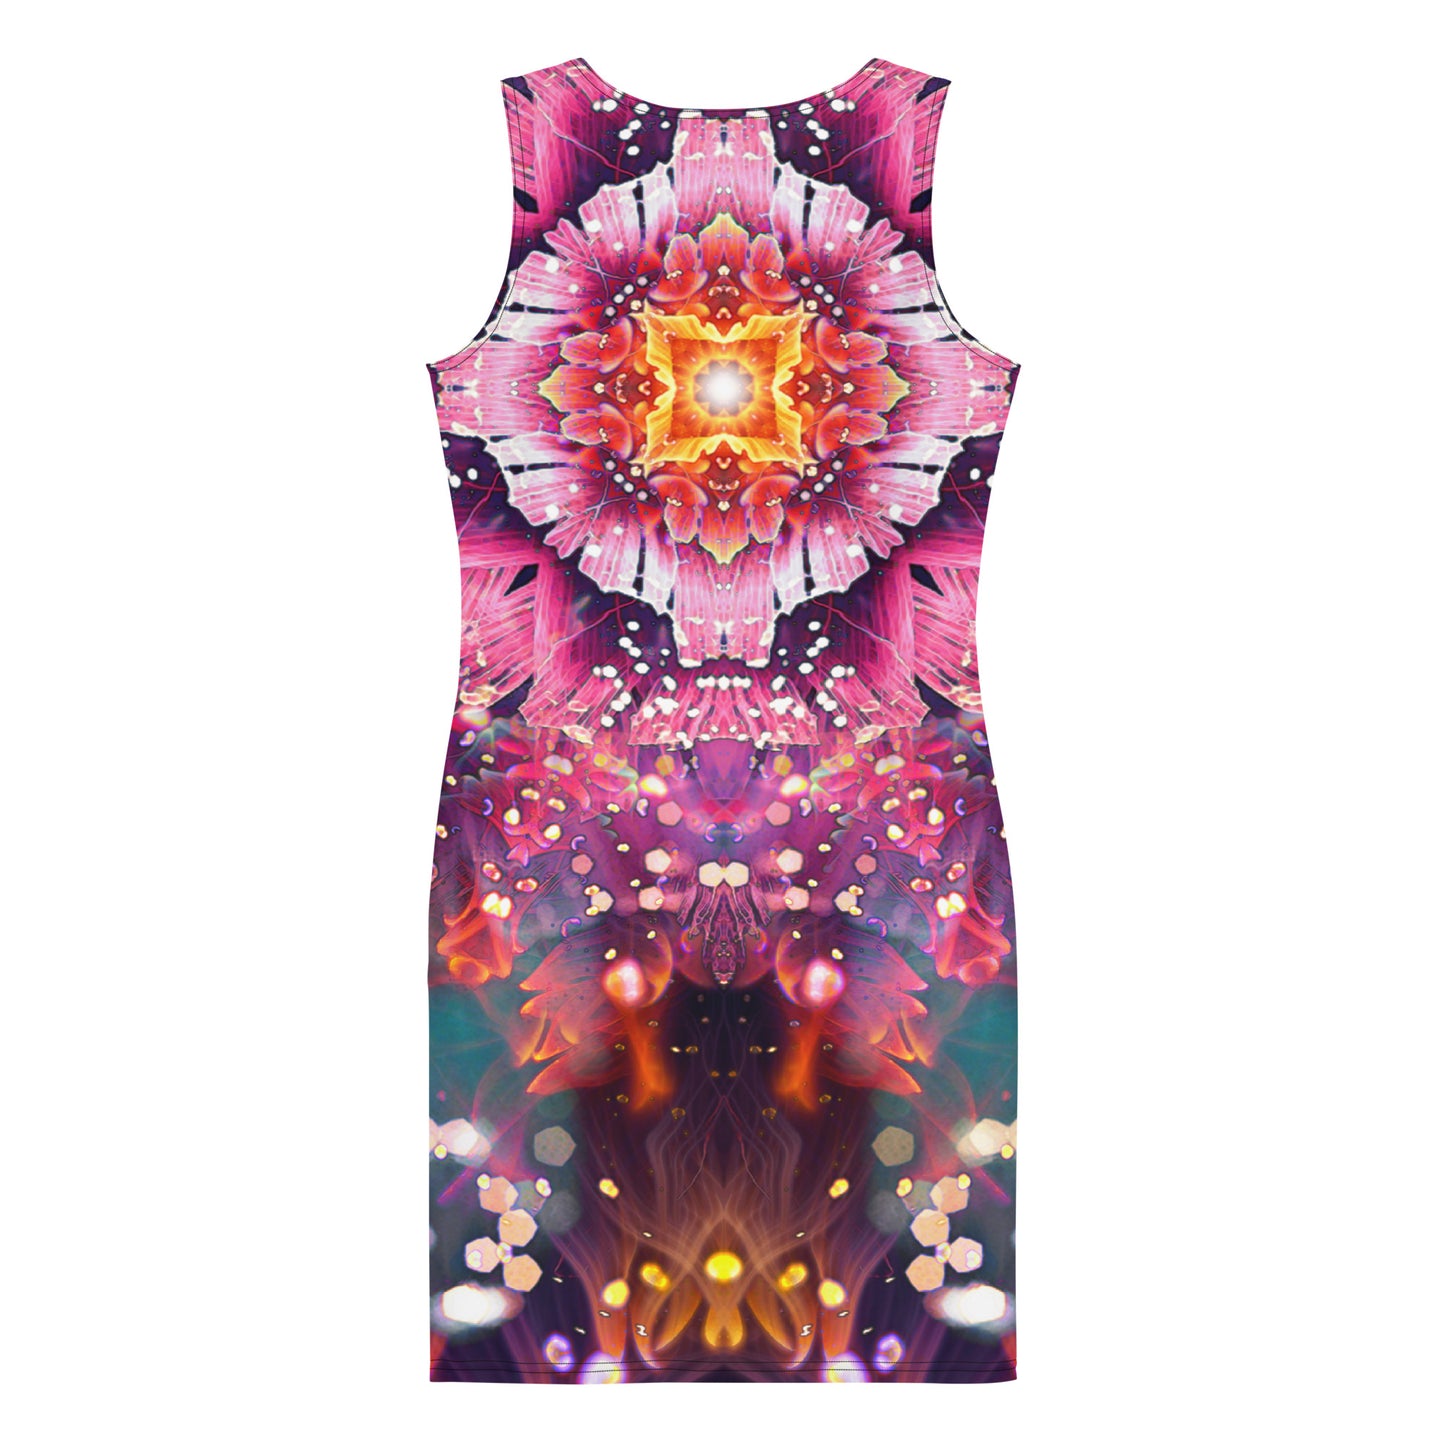 "Endless Mallow" Bodycon FITTED DRESS